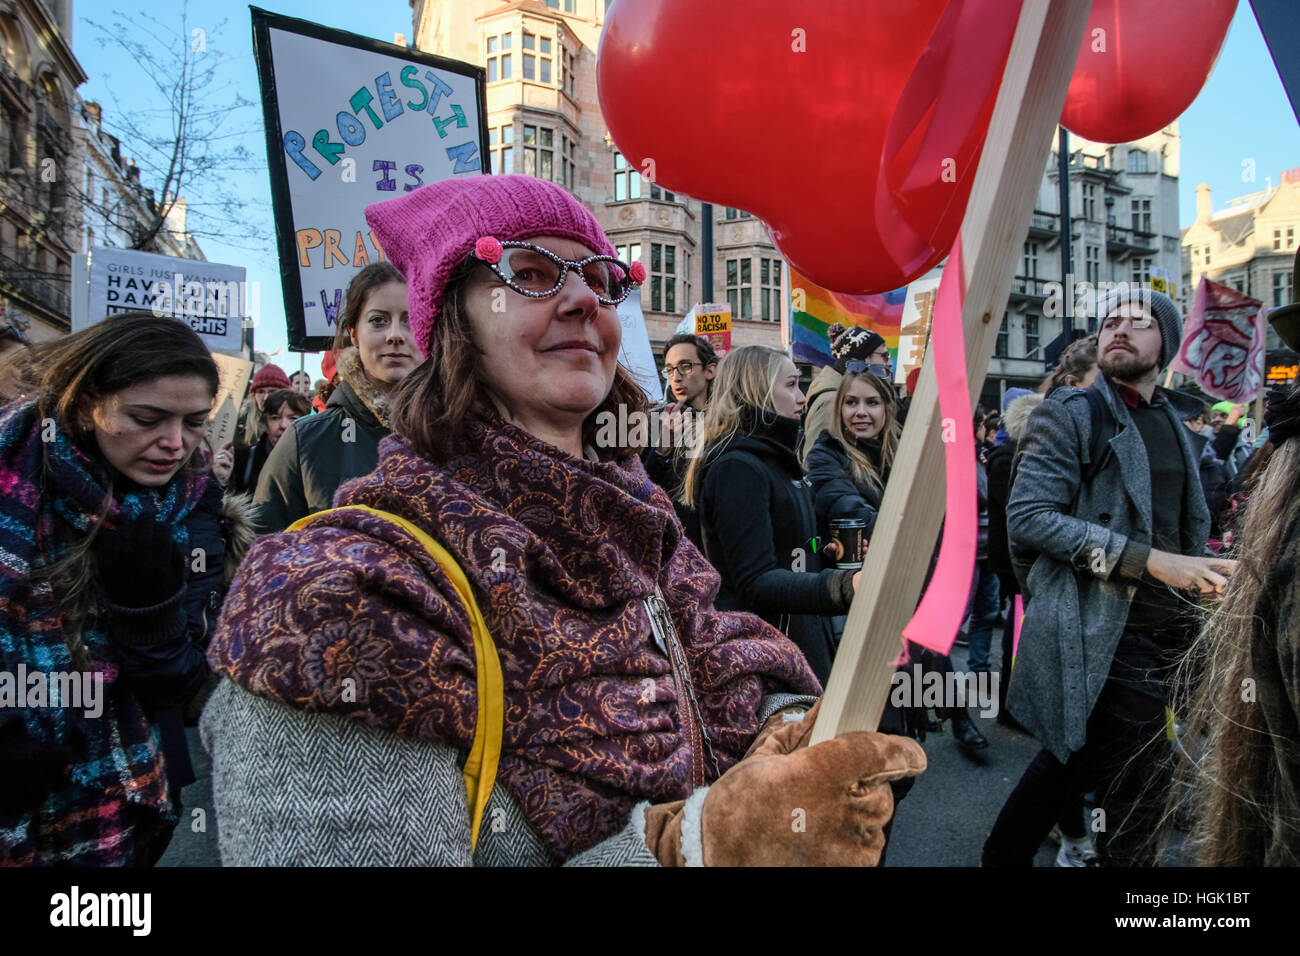 London, UK. 22nd Jan, 2017. Women's Walk in London. Women with banners walking along Piccadilly. People of all genders march in London as part of an international day of action in solidarity. They unite and stand together for the dignity and equality of all peoples, for the safety and health of our planet and for the strength of our vibrant and diverse communities. Credit: Martin Pickles Alamy Live News Stock Photo